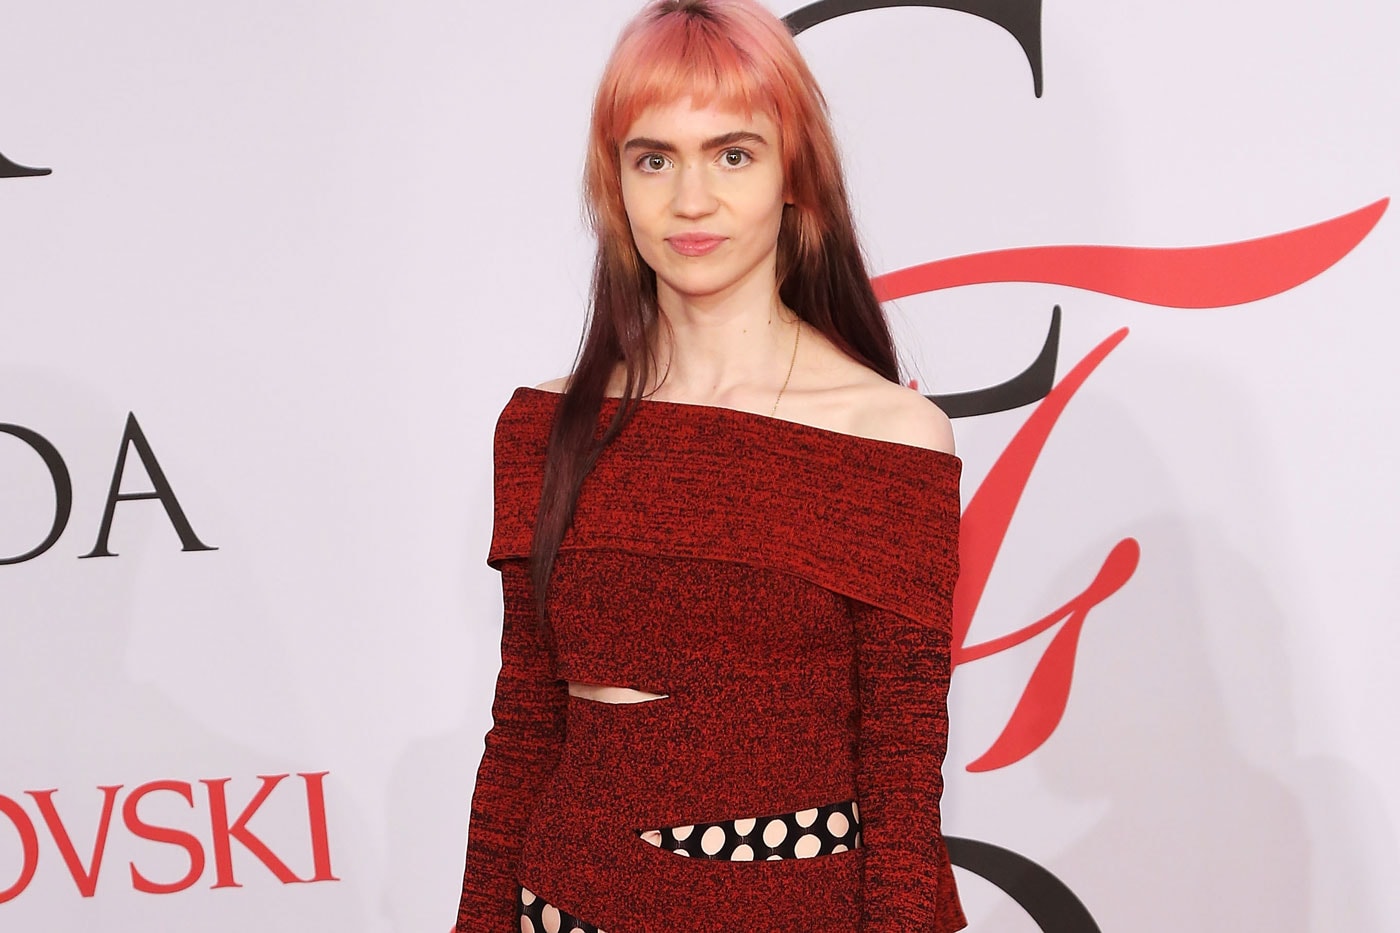 Grimes' New Album is Dropping Very Soon